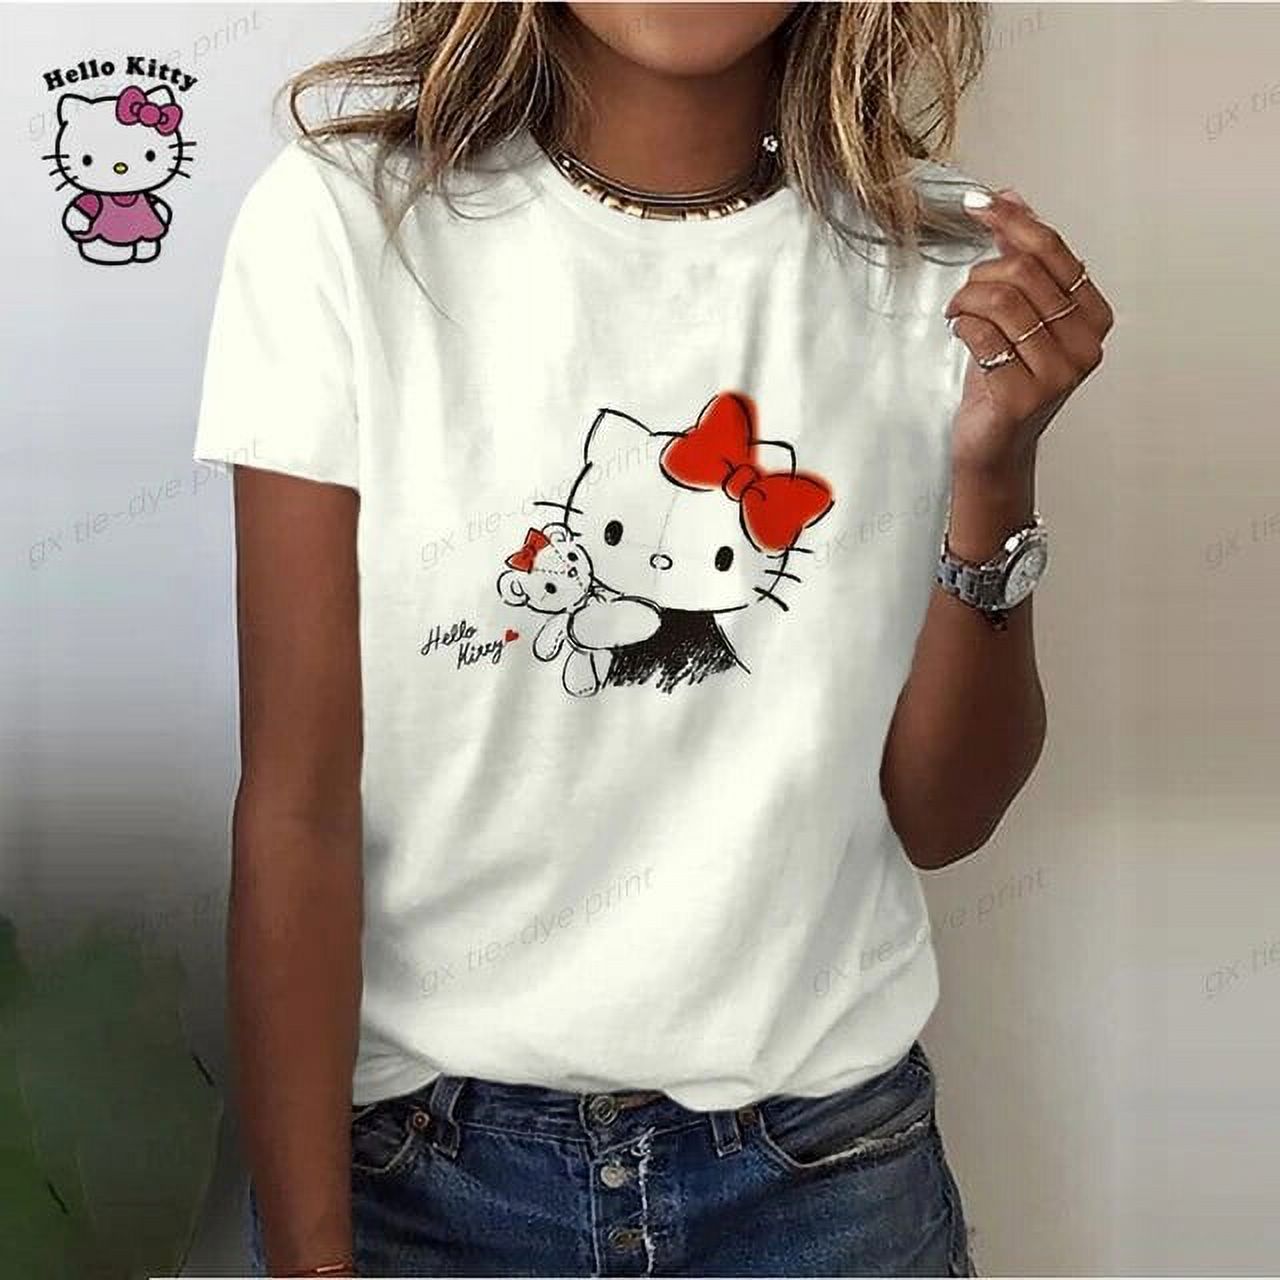 Summer Women‘s T Shirt For Ladies‘s Short Sleeve Tops Tees Fashion Print Hello Kitty Graphics T-shirt For Women‘s Y2k Clothing - image 1 of 7